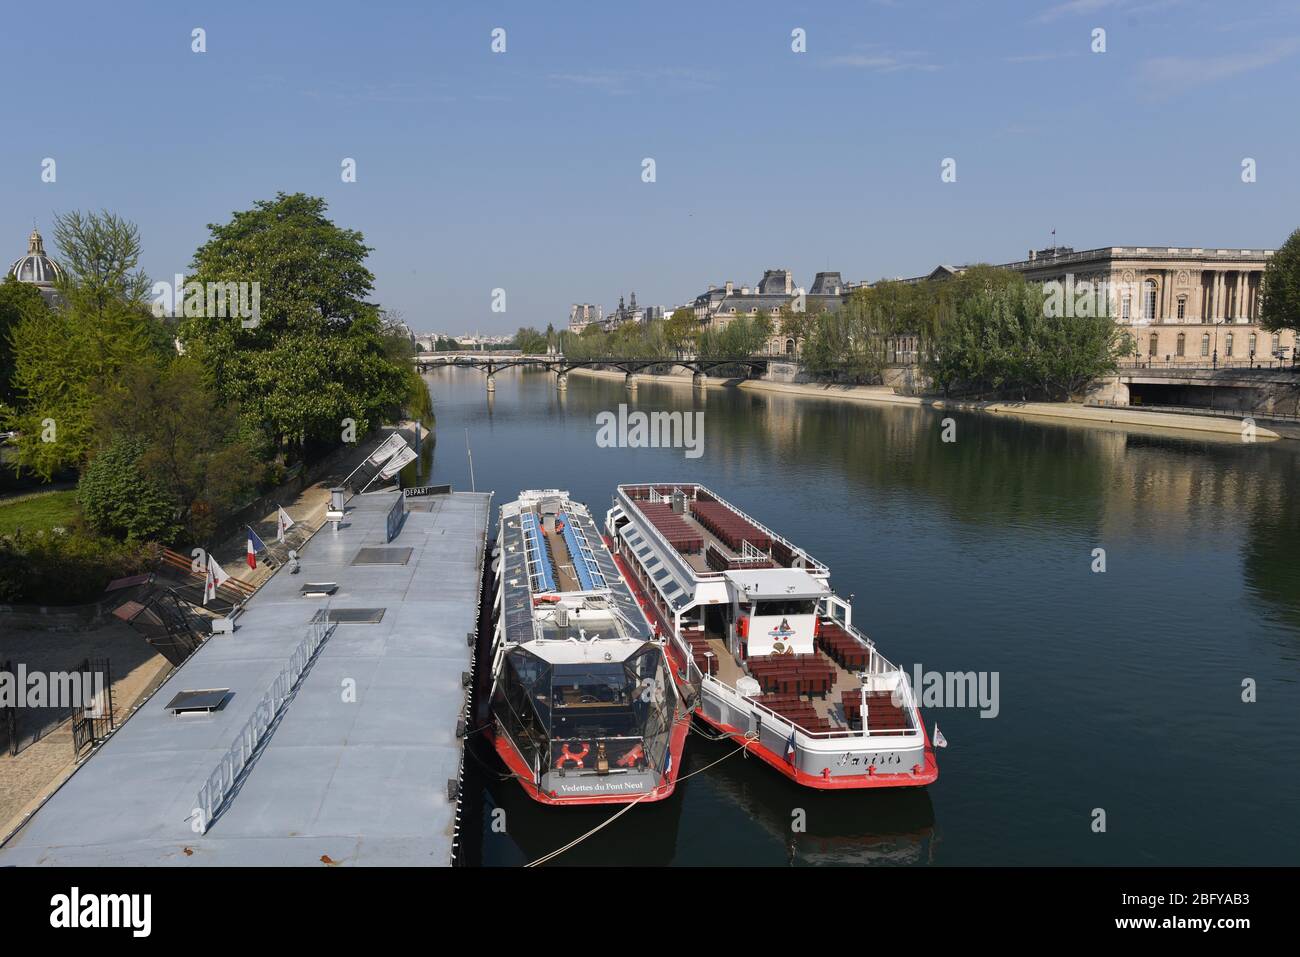 *** STRICTLY NO SALES TO FRENCH MEDIA OR PUBLISHERS - RIGHTS RESERVED ***April 12, 2020 - Paris, France: Empty tourist landmark in Paris during the covid-19 lockdown. Fly boats at quay. Stock Photo